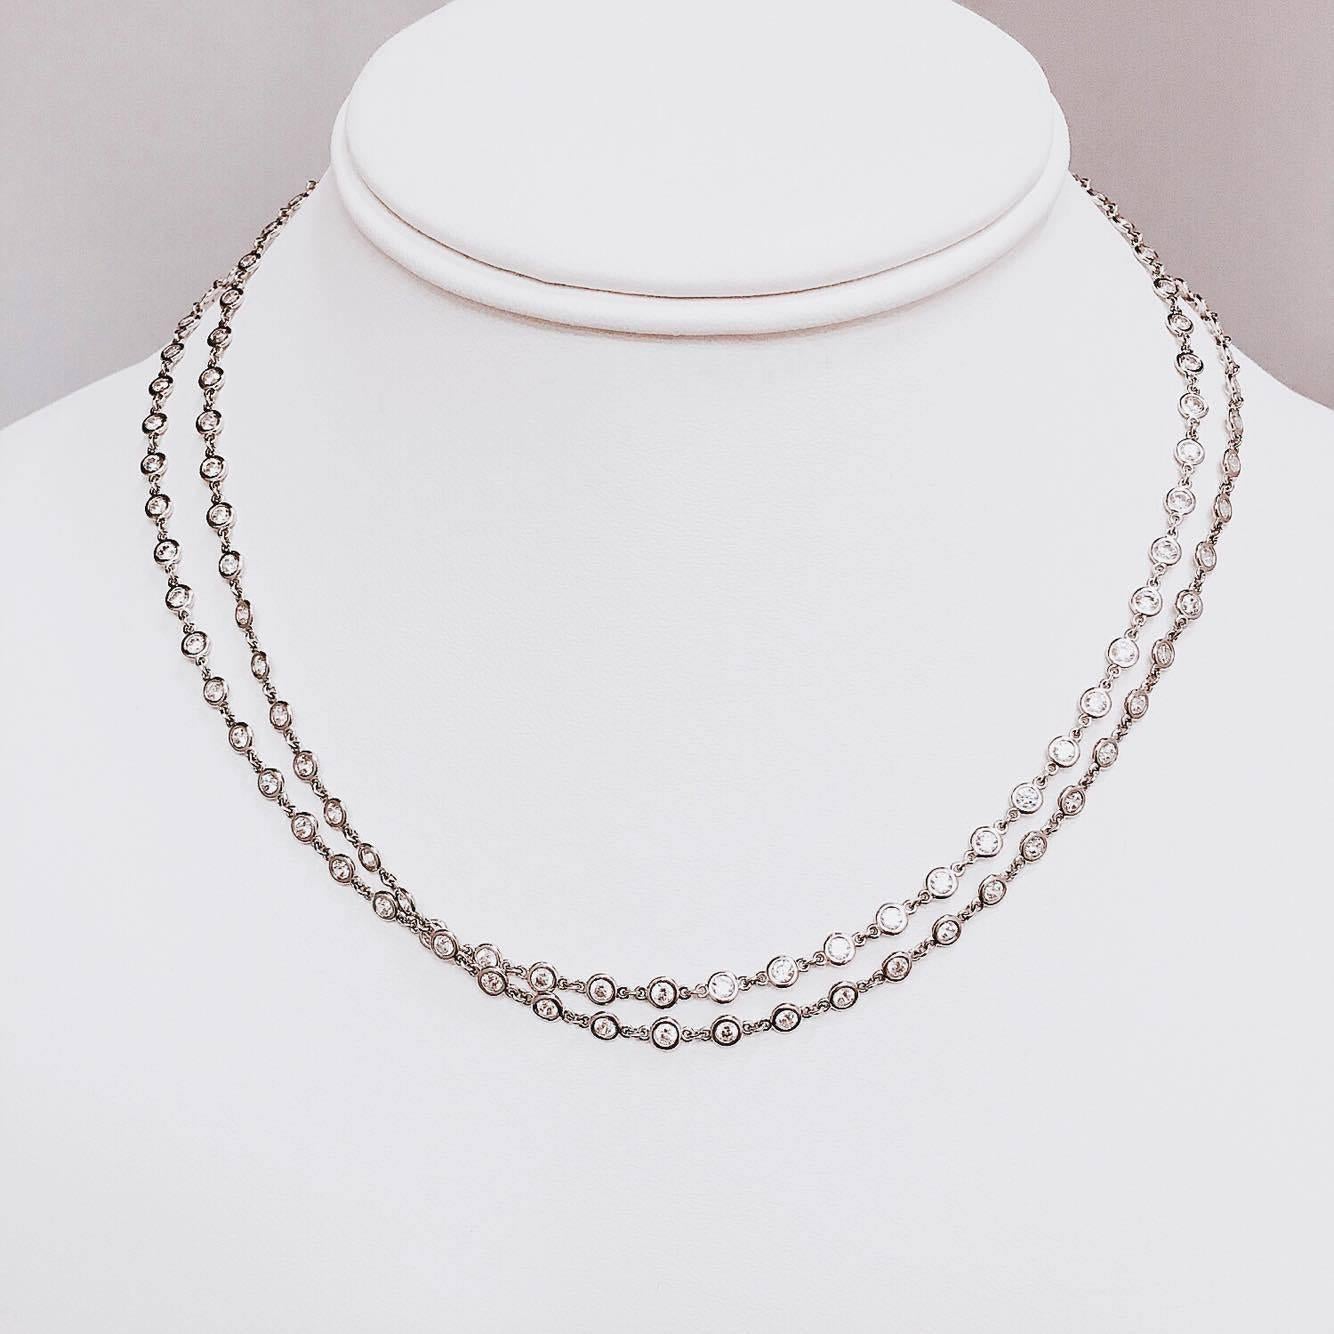 Modern 6.05 Carat Link to Link Diamond by the Yard Necklace 34 Inches Long